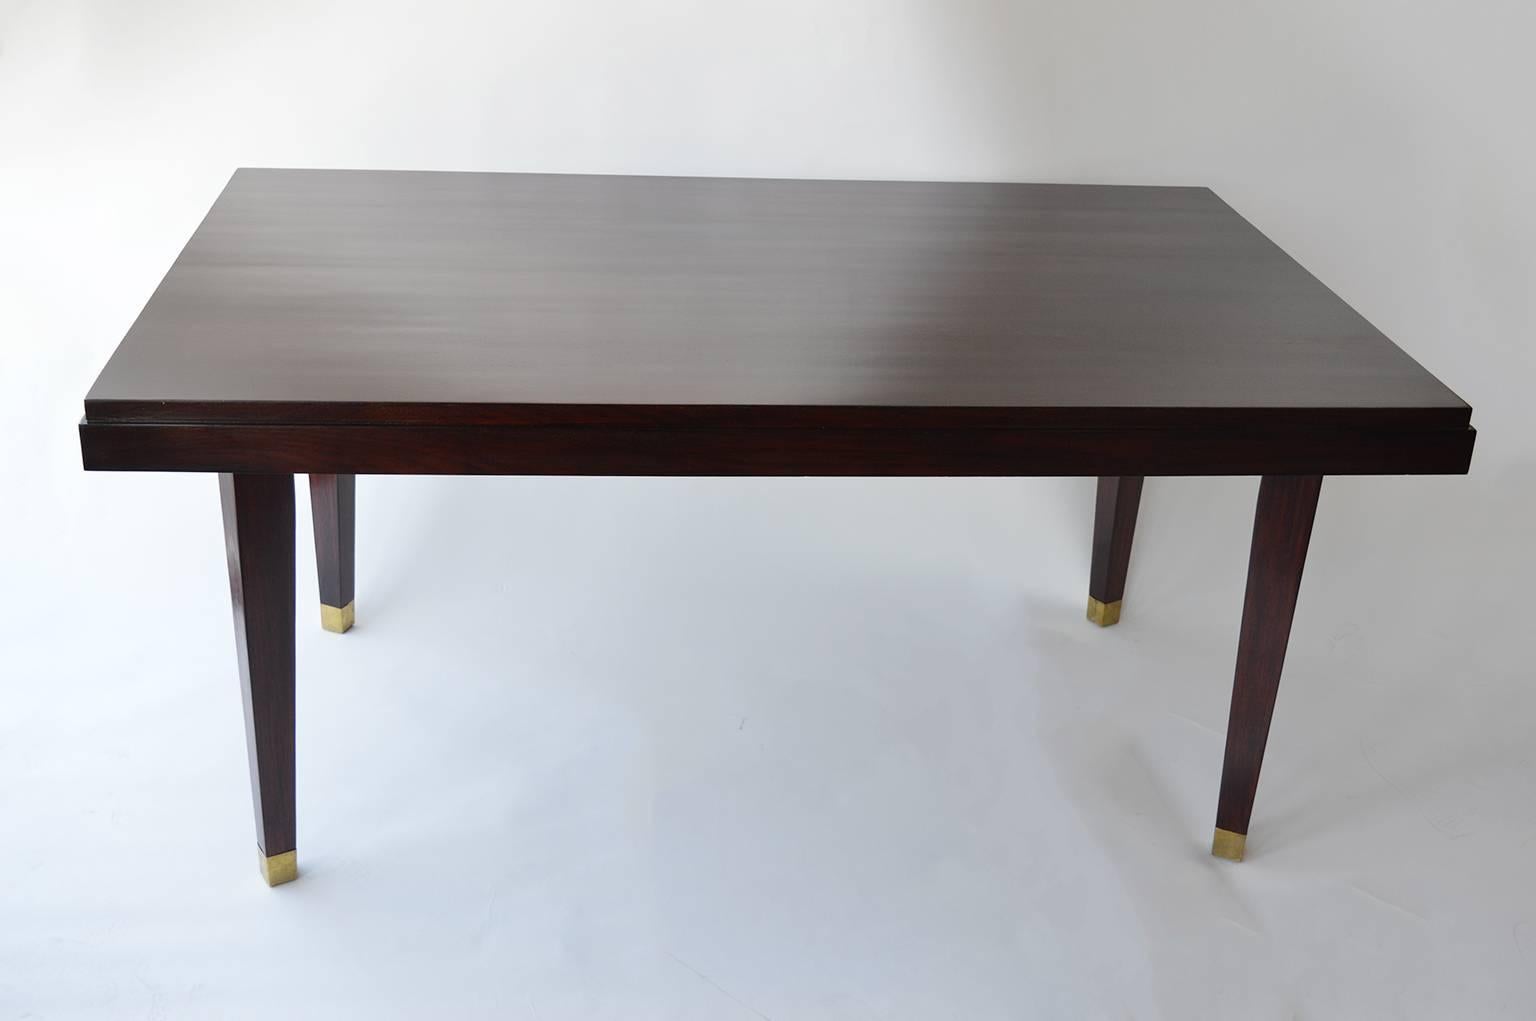 Mid-Century modern dining table. Legs of the mahogany table are capped and accented with brushed brass feet.
The tables full width with extensions is 90.5 inches.